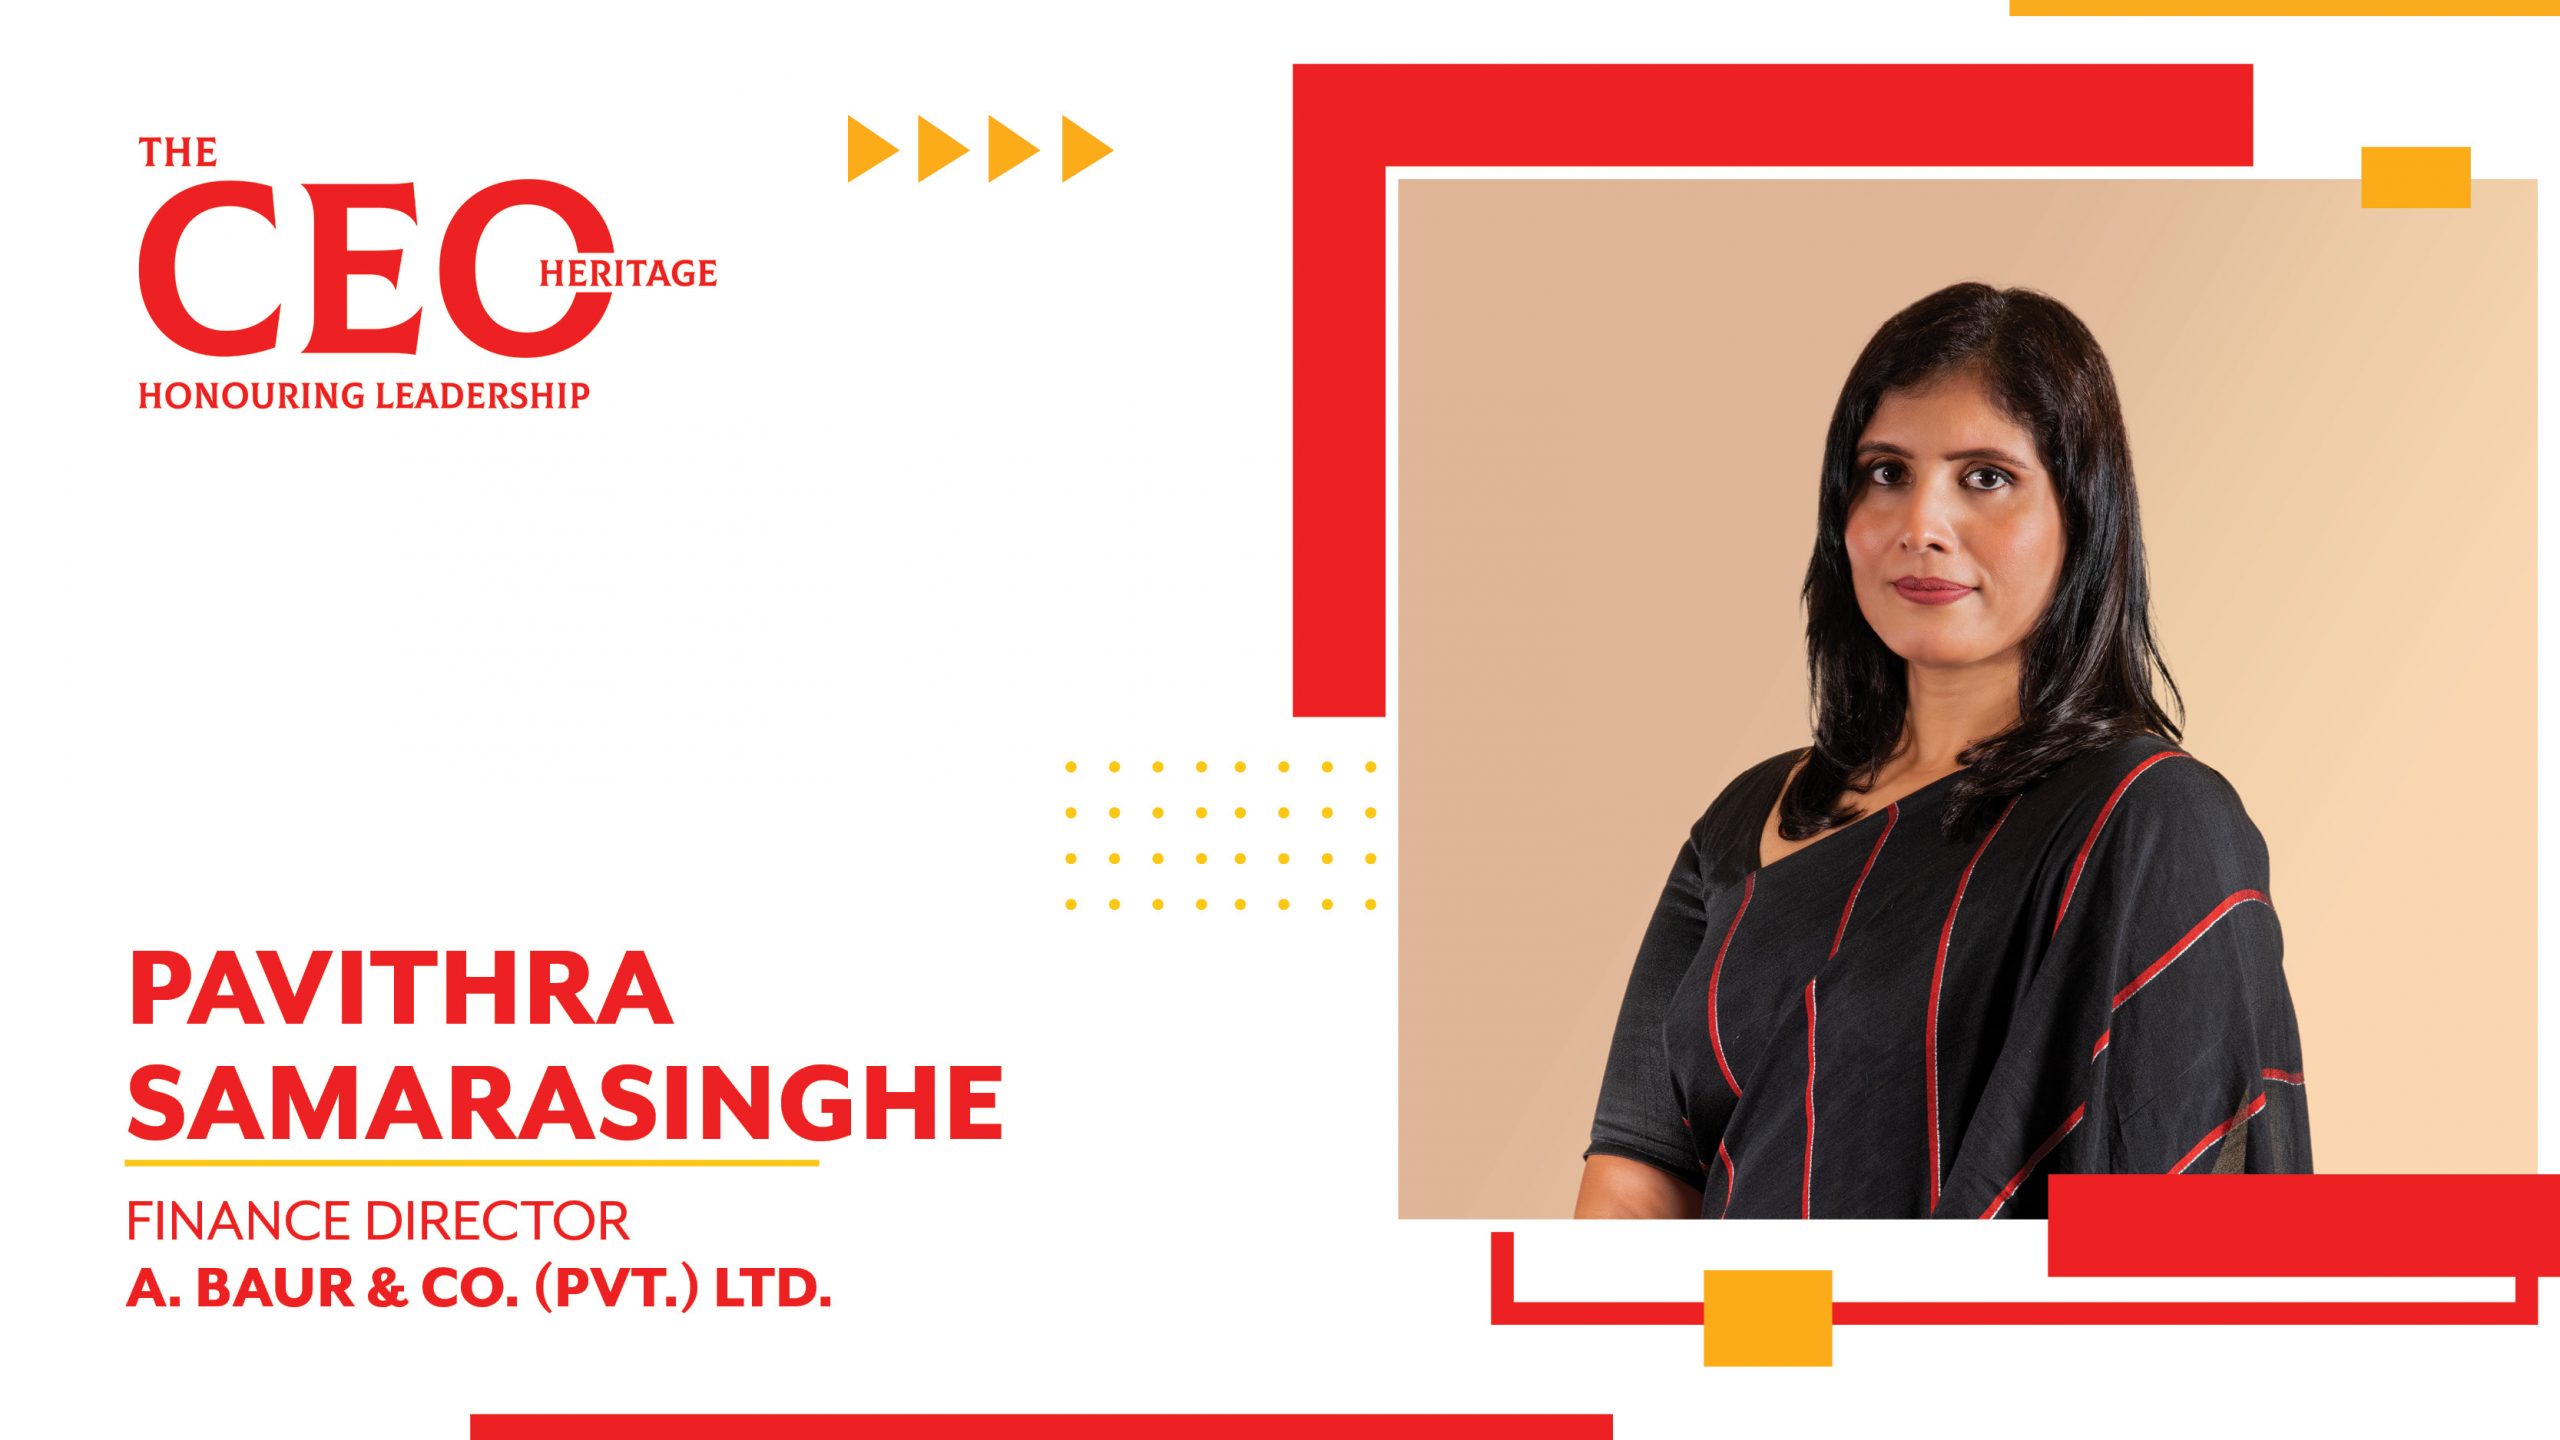 Baurs: An emblematic pioneer in the corporate sector – Finance Director of A. Baur & Co. (Pvt.) Ltd., Pavithra Samarasinghe